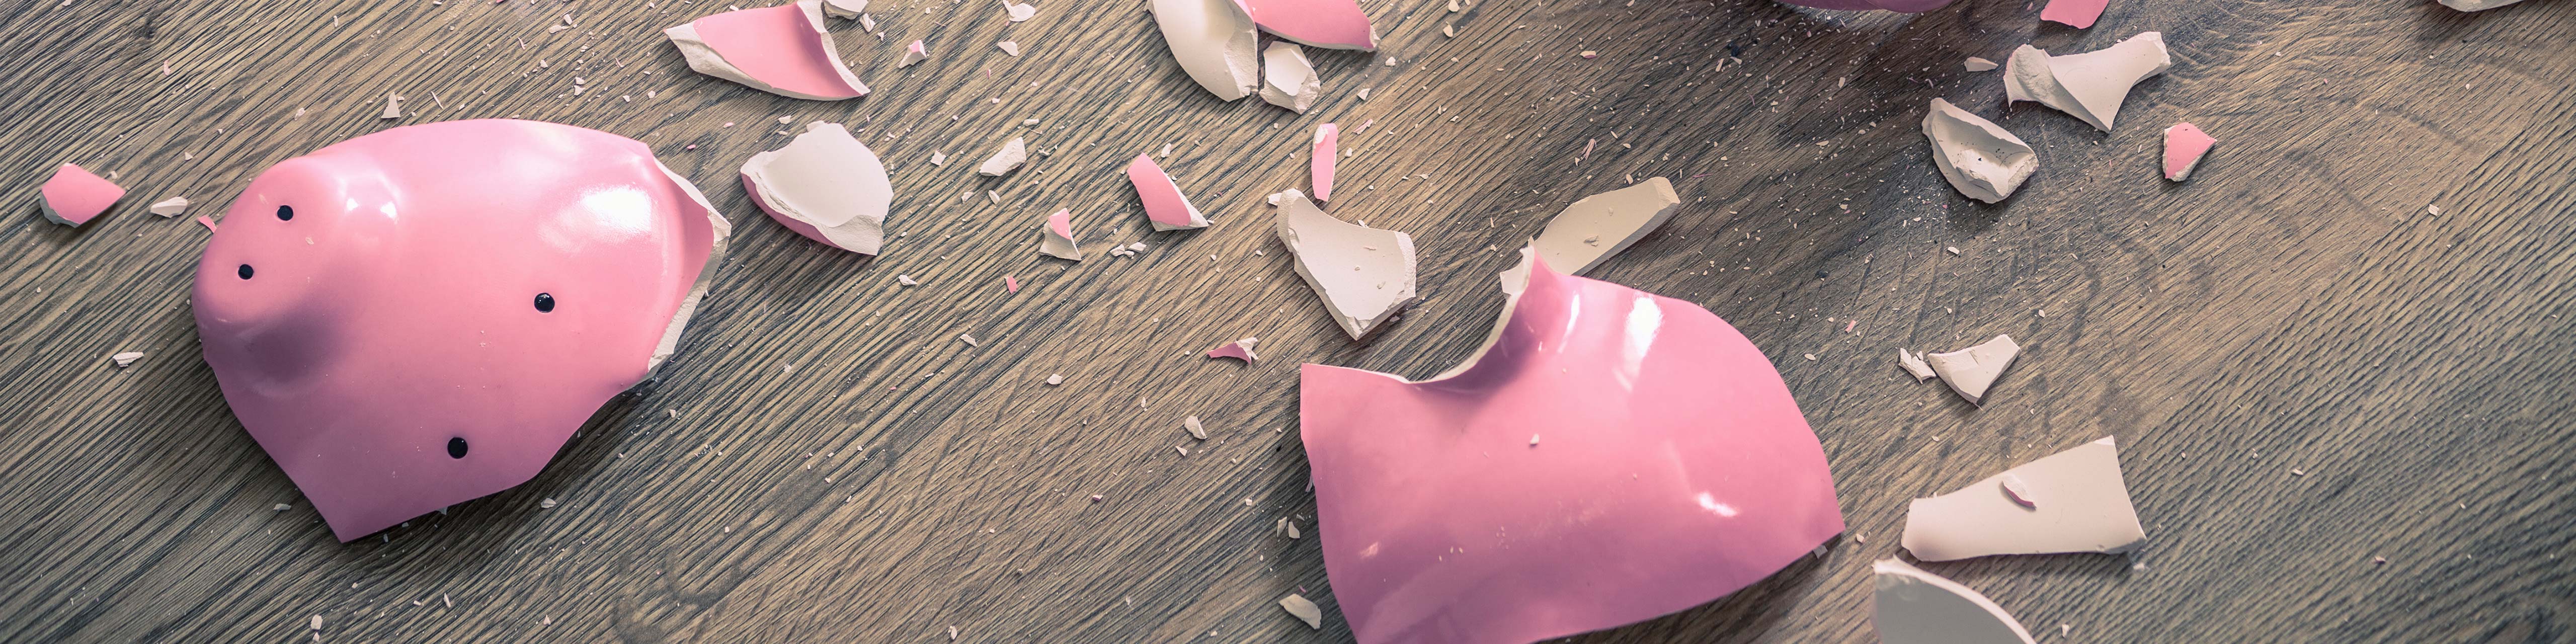 a pink piggy bank lays smashed on the floor